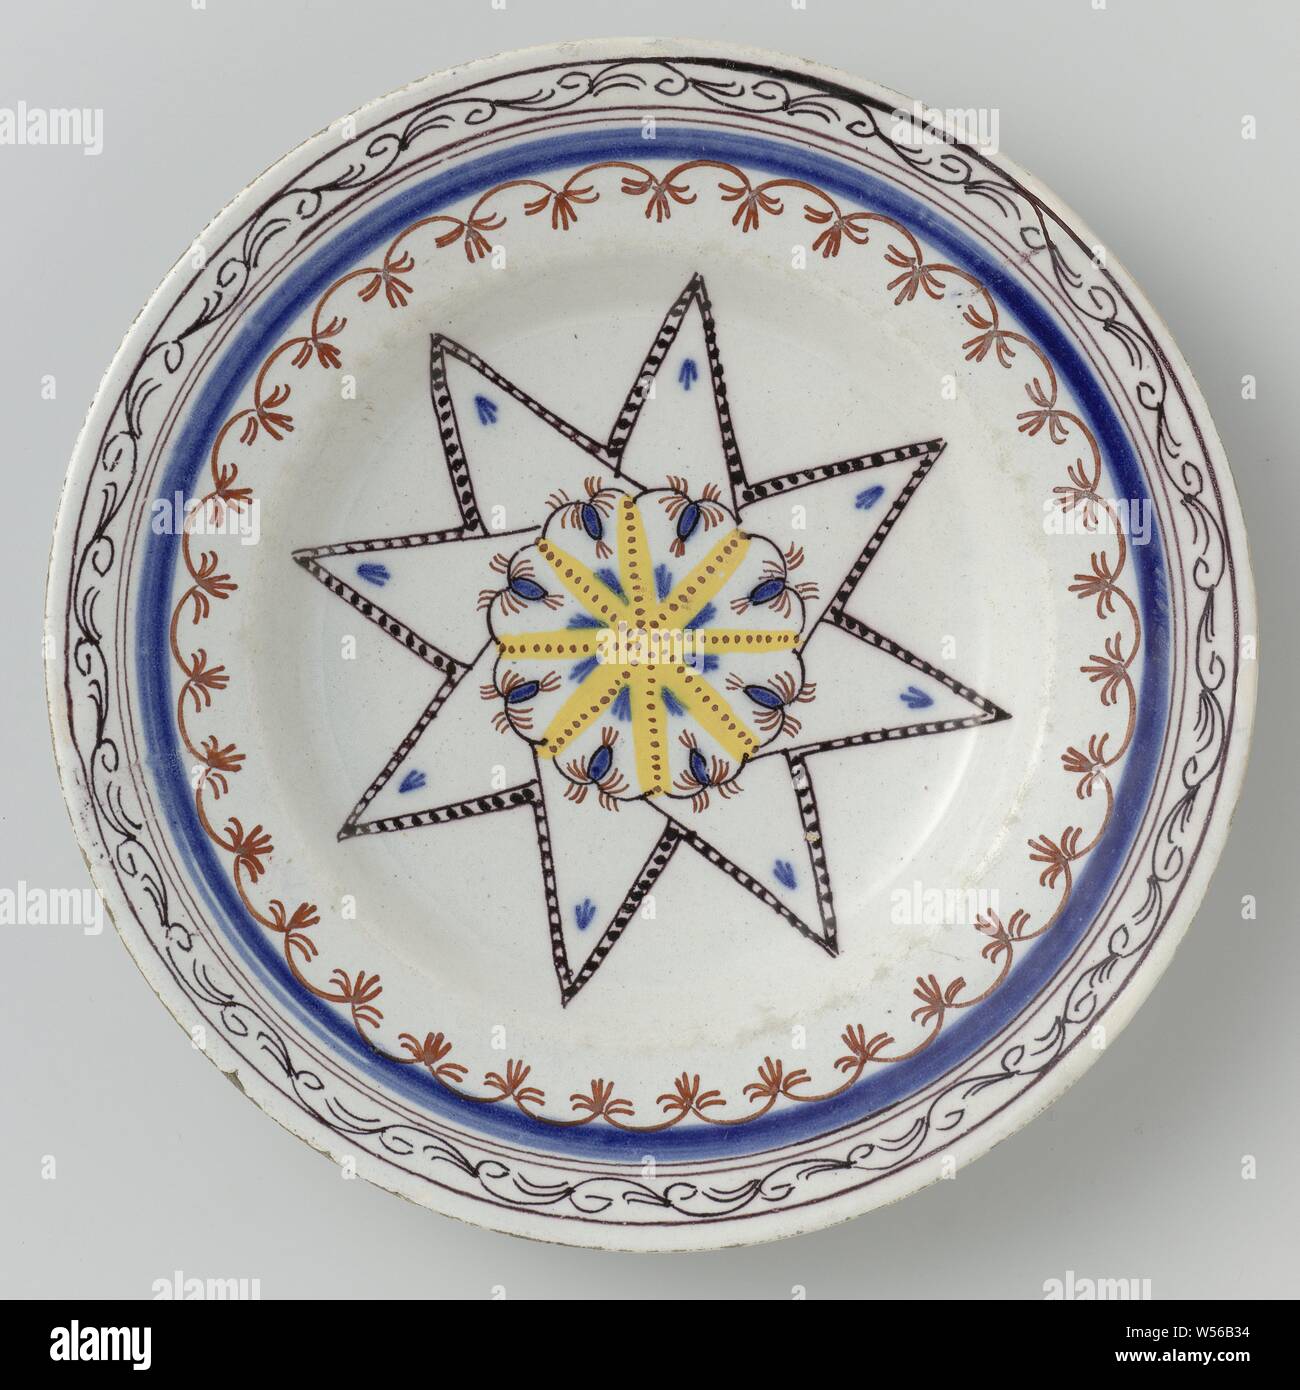 Plate of faience, Plate of faience. Multicolored painted with a star and decorated edges., anonymous, Delft, 1770 - 1800, d 23.3 cm × h 3.4 cm Stock Photo